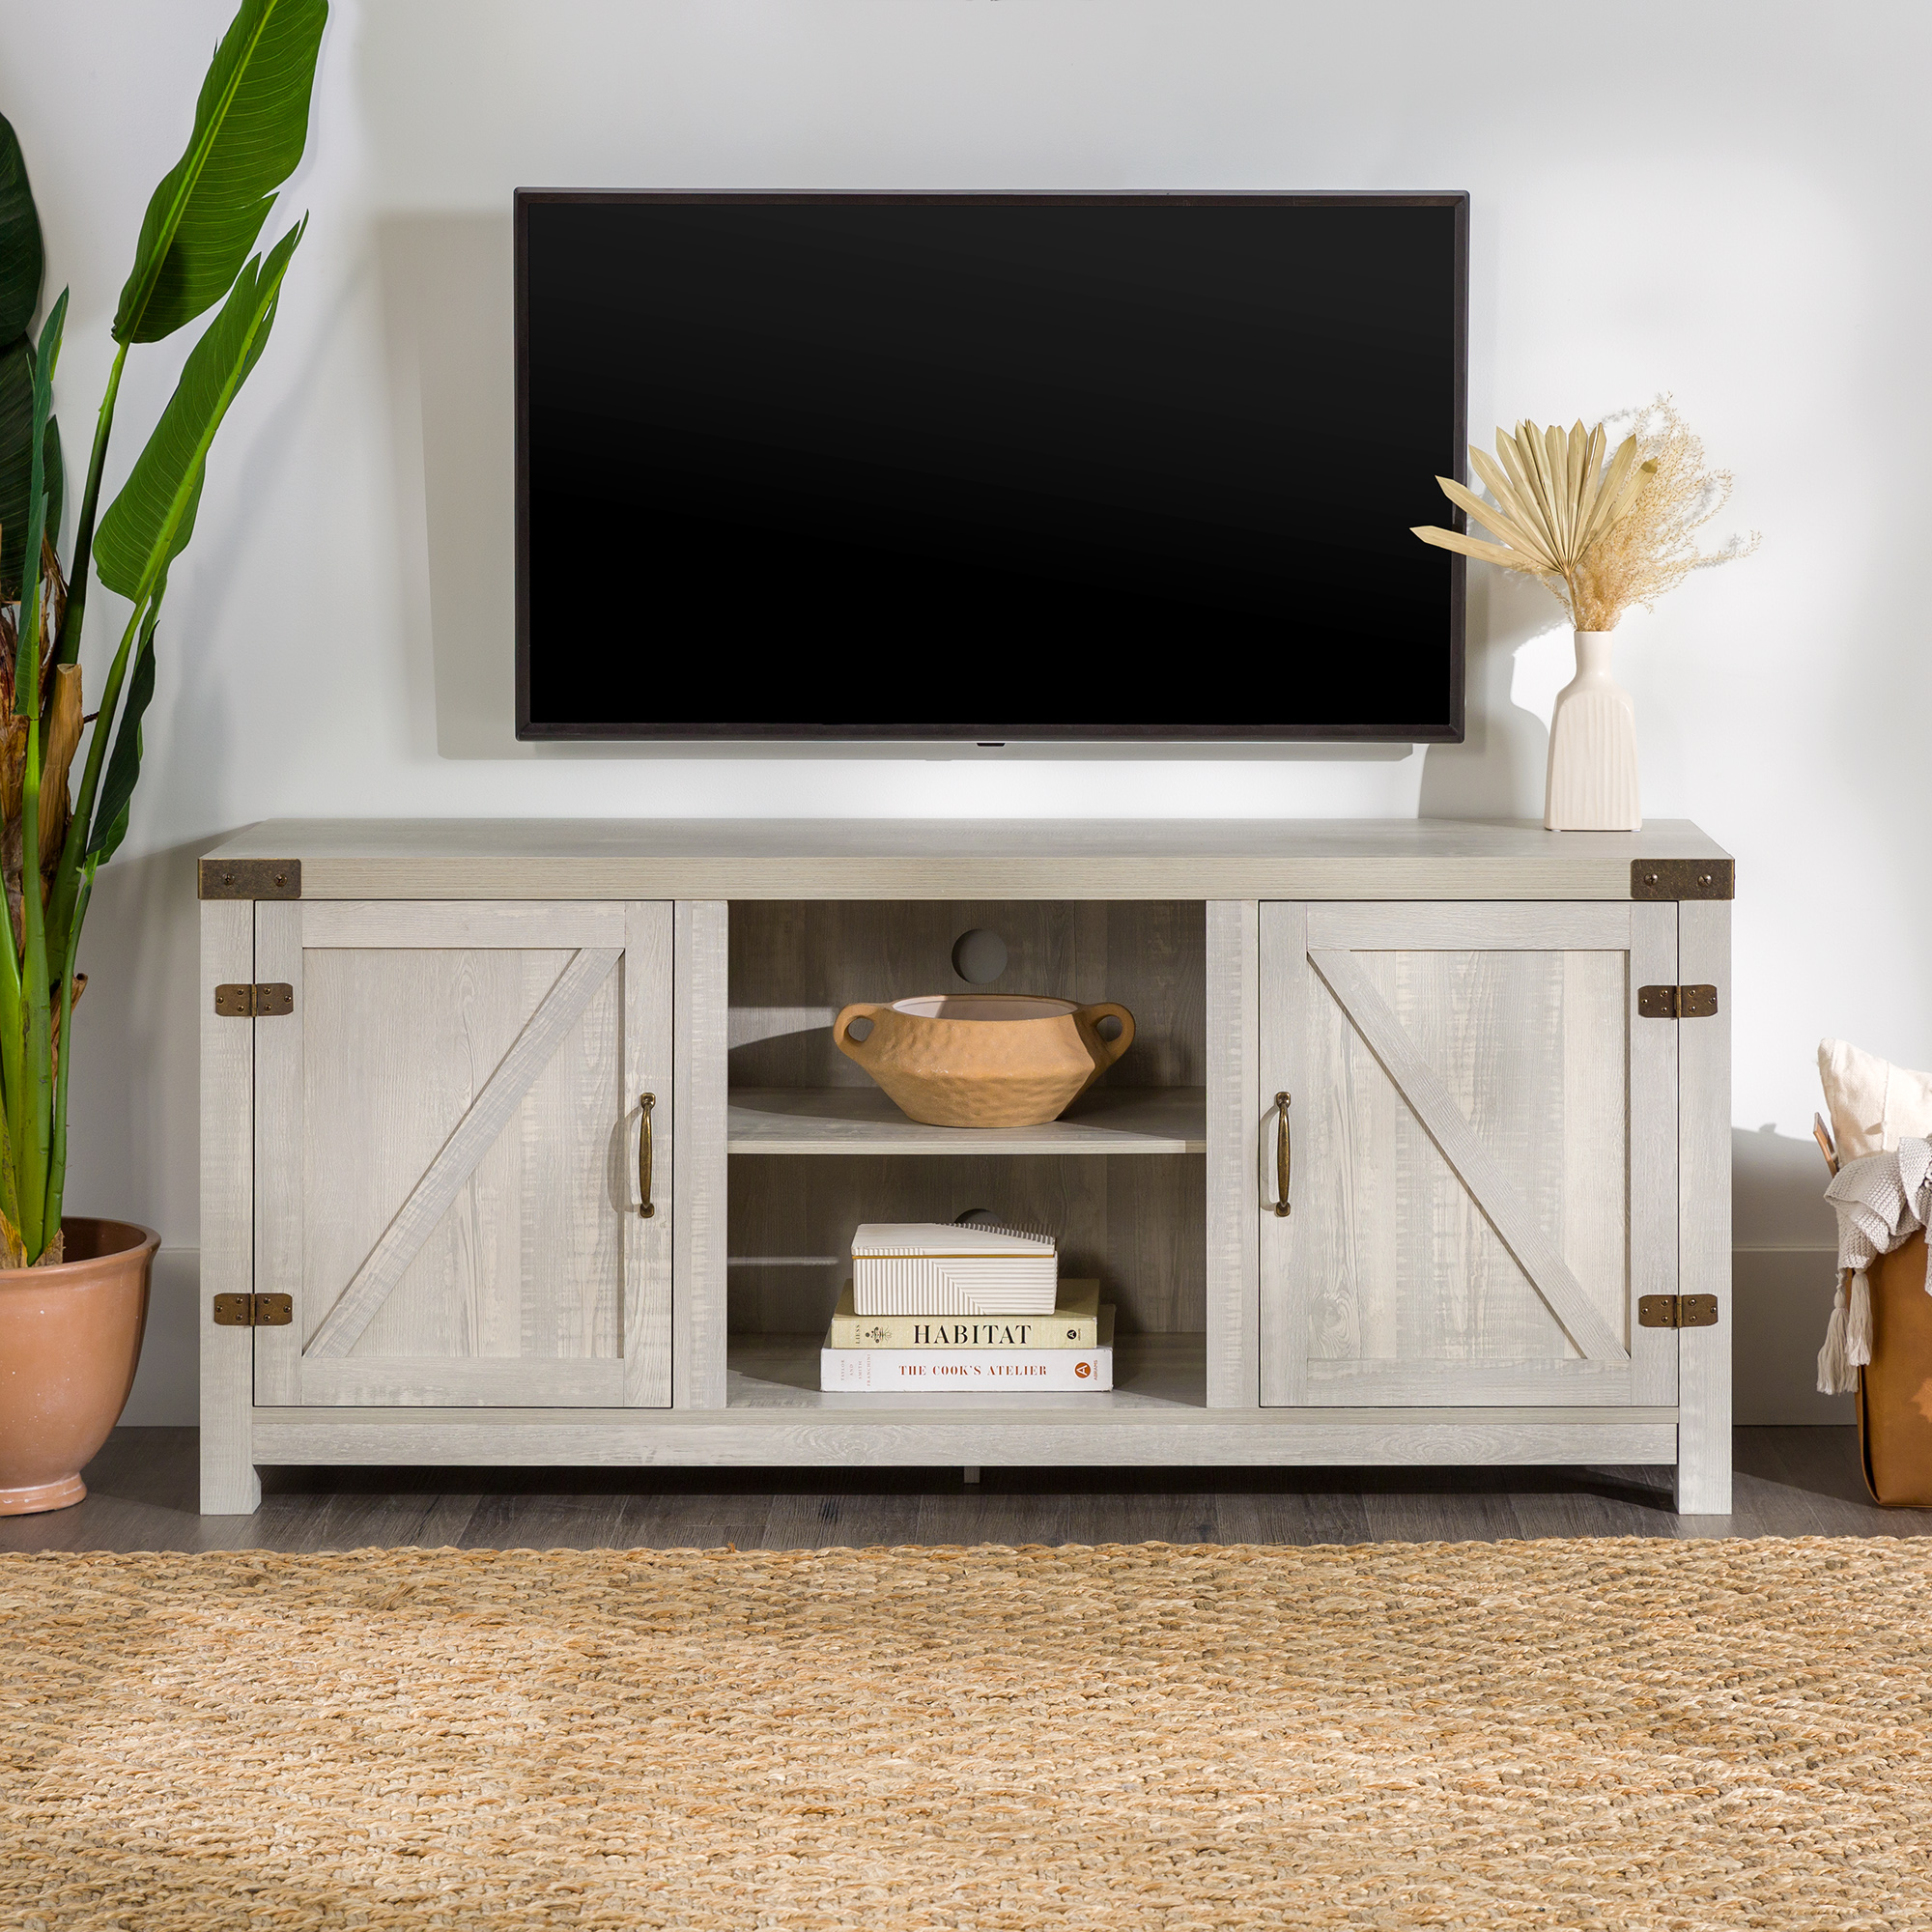 Walker Edison Modern Farmhouse Barn Door TV Stand for TVs up to 65", Stone Grey - image 3 of 22